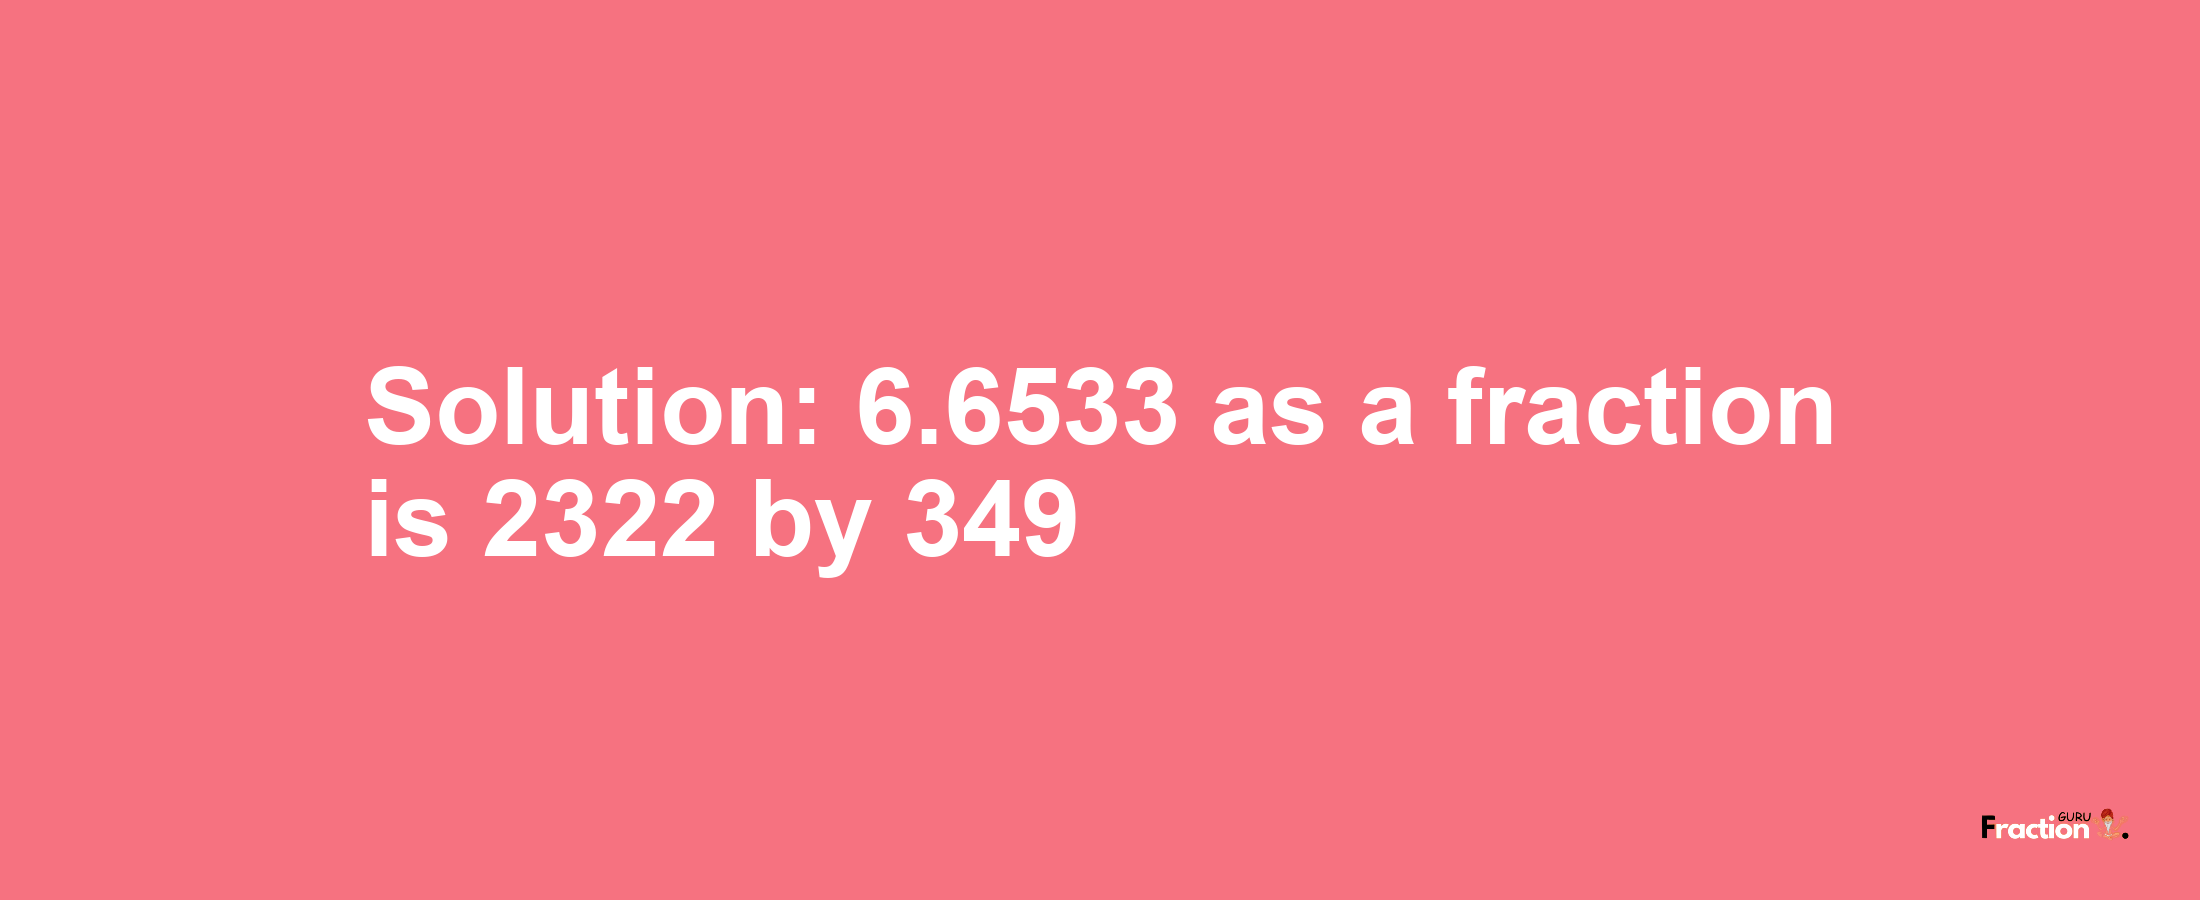 Solution:6.6533 as a fraction is 2322/349